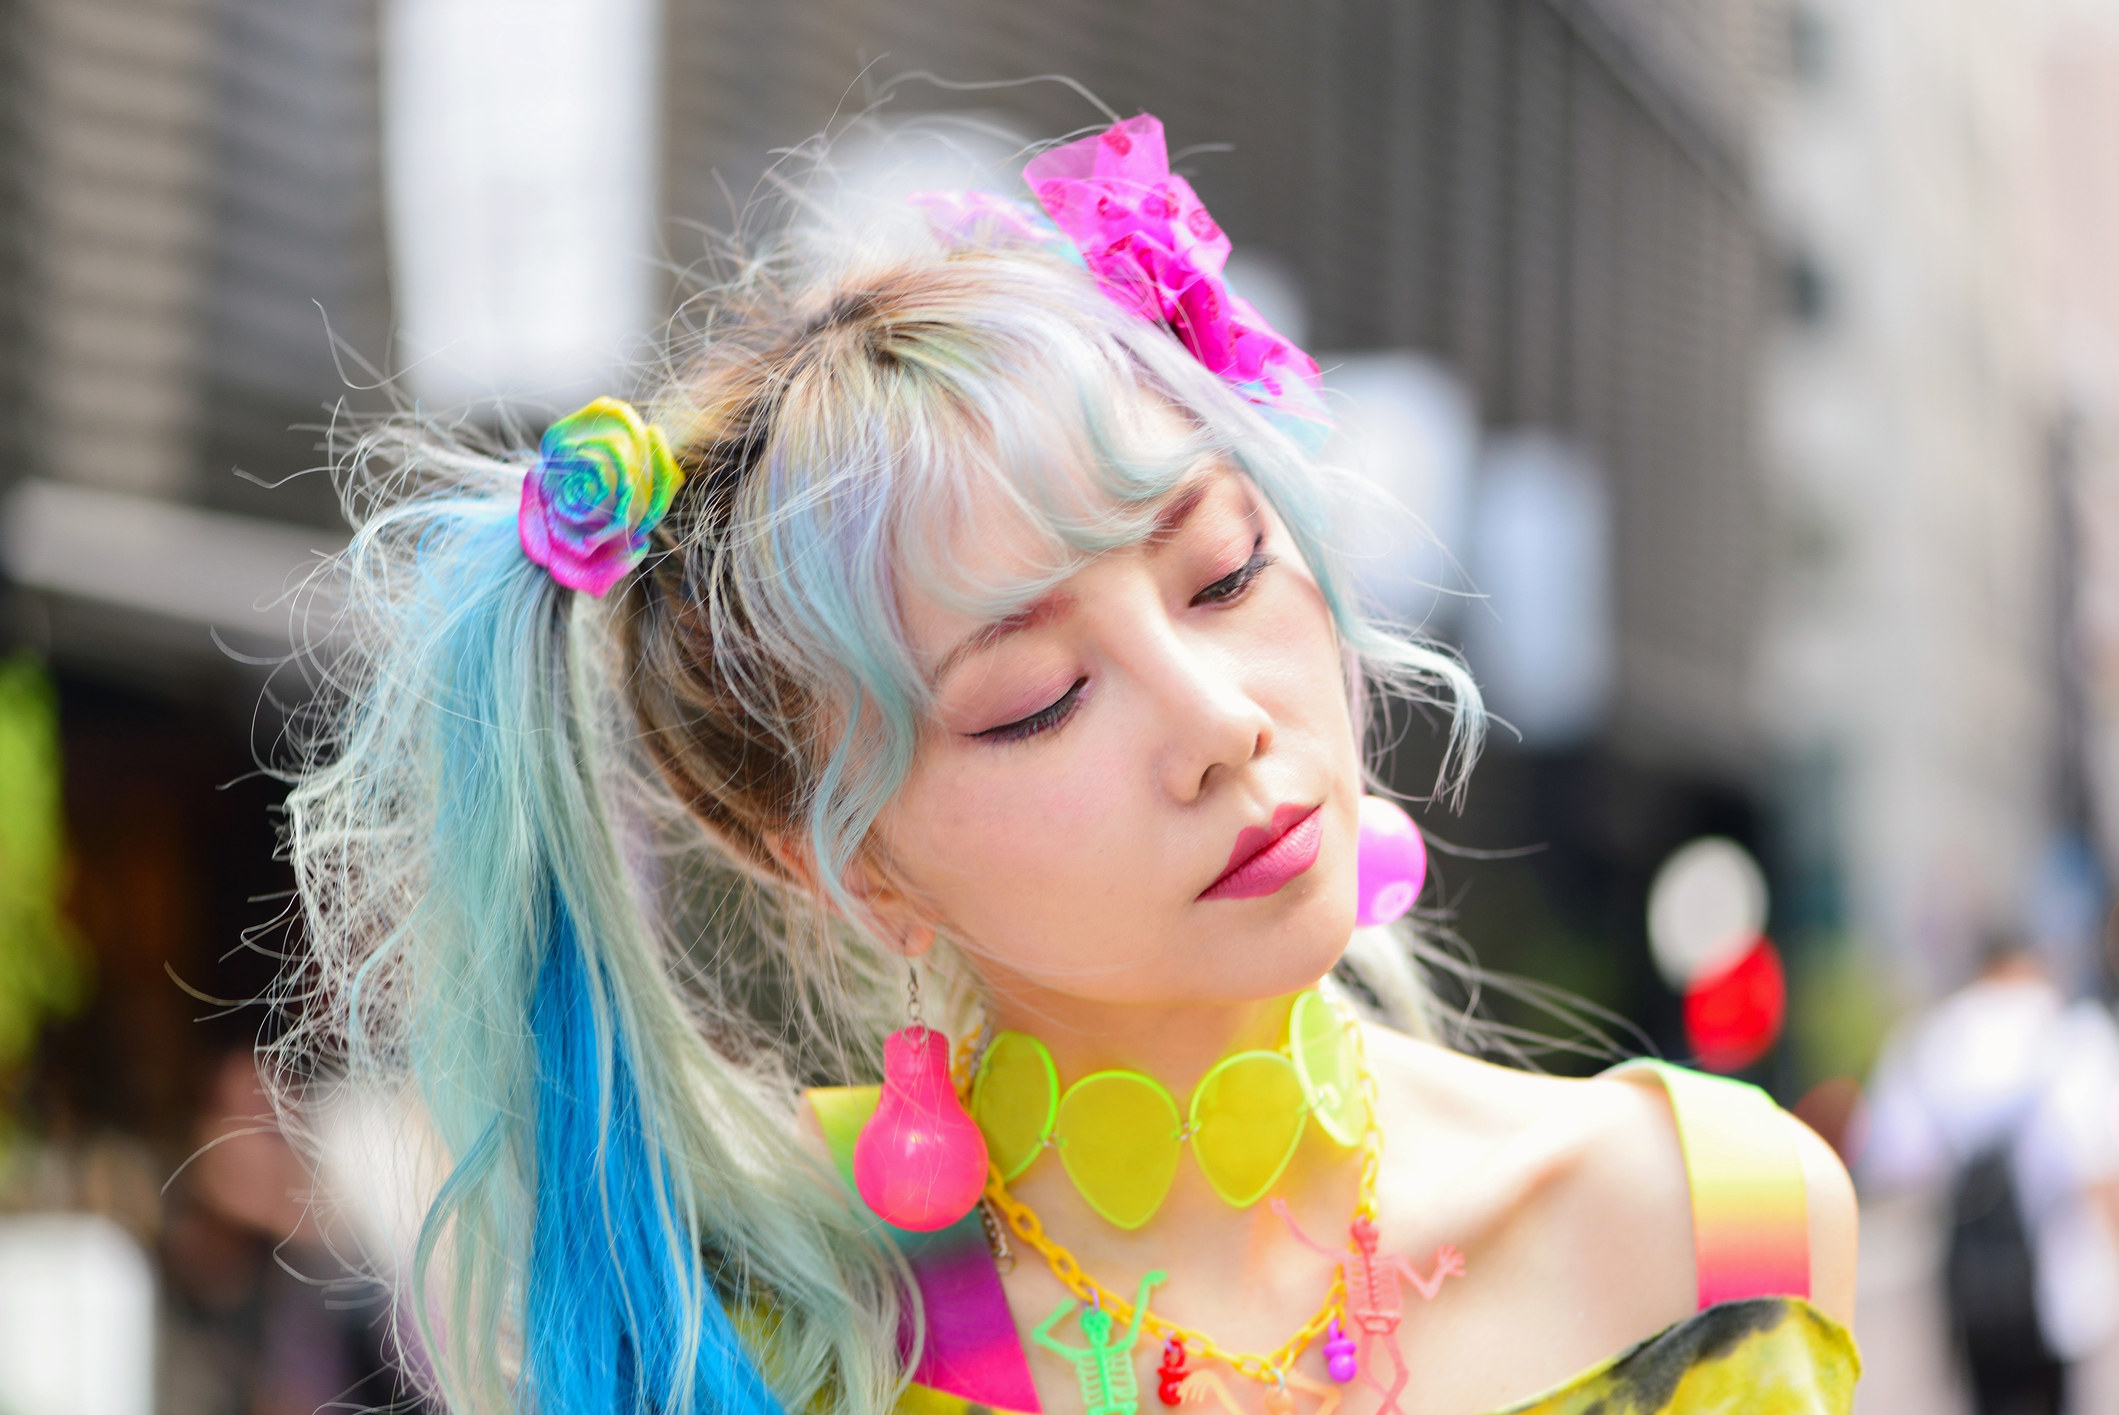 Japanese woman with colorful hair and neon accessories